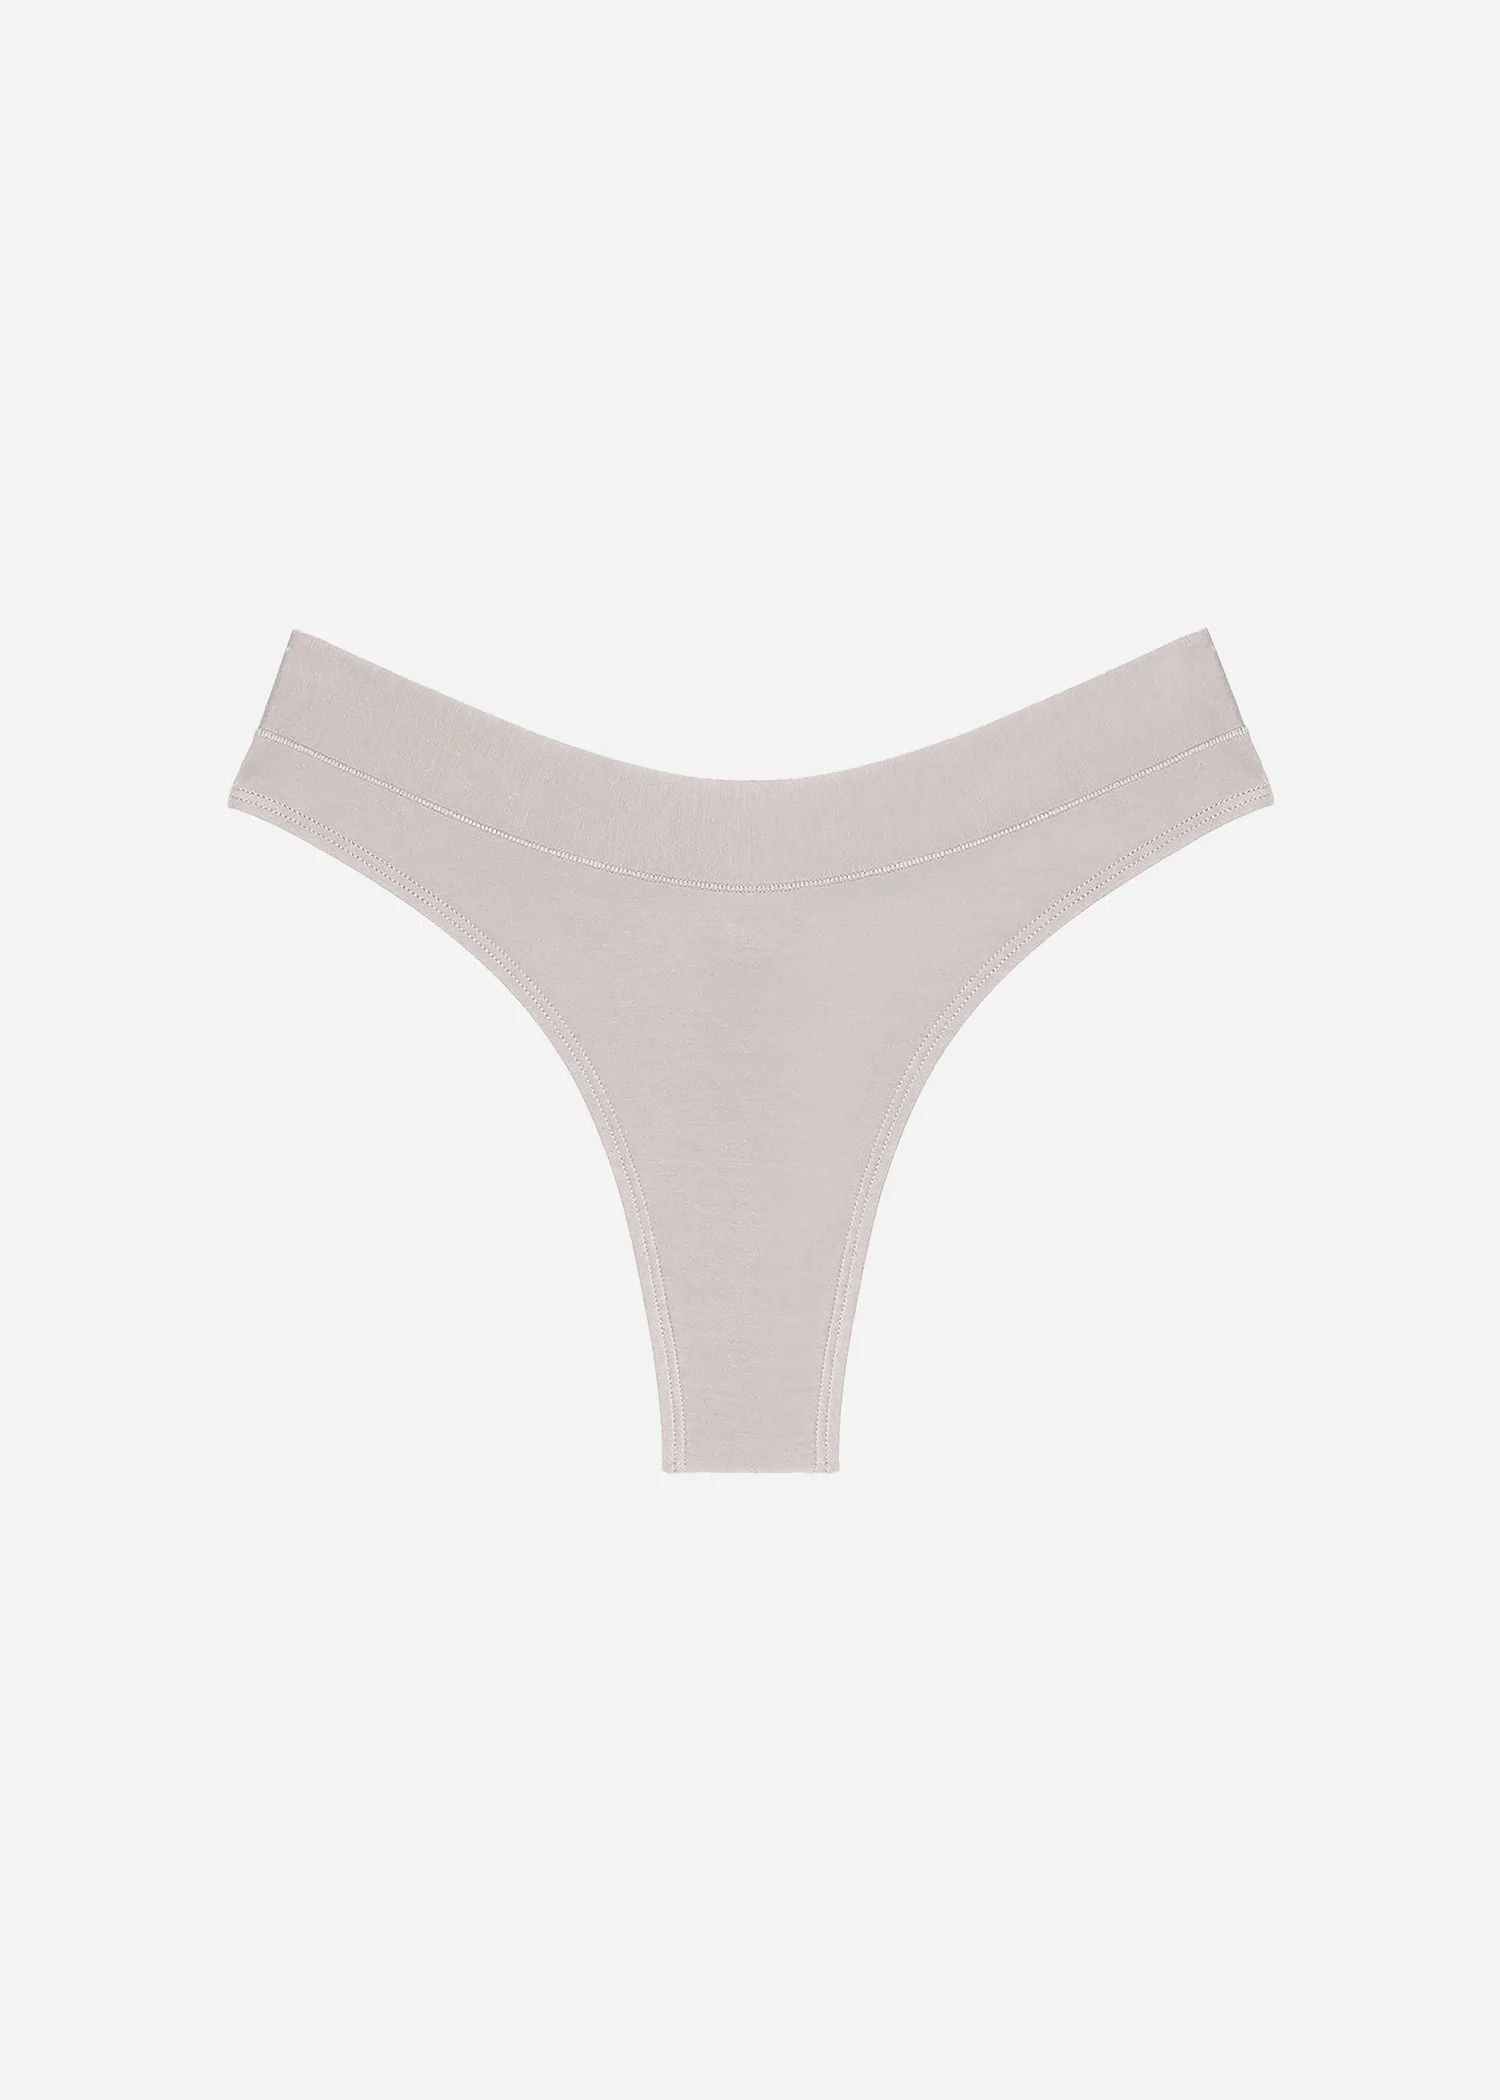 COSABELLA - Avoid Visible Panty Lines with thin g-strings like the